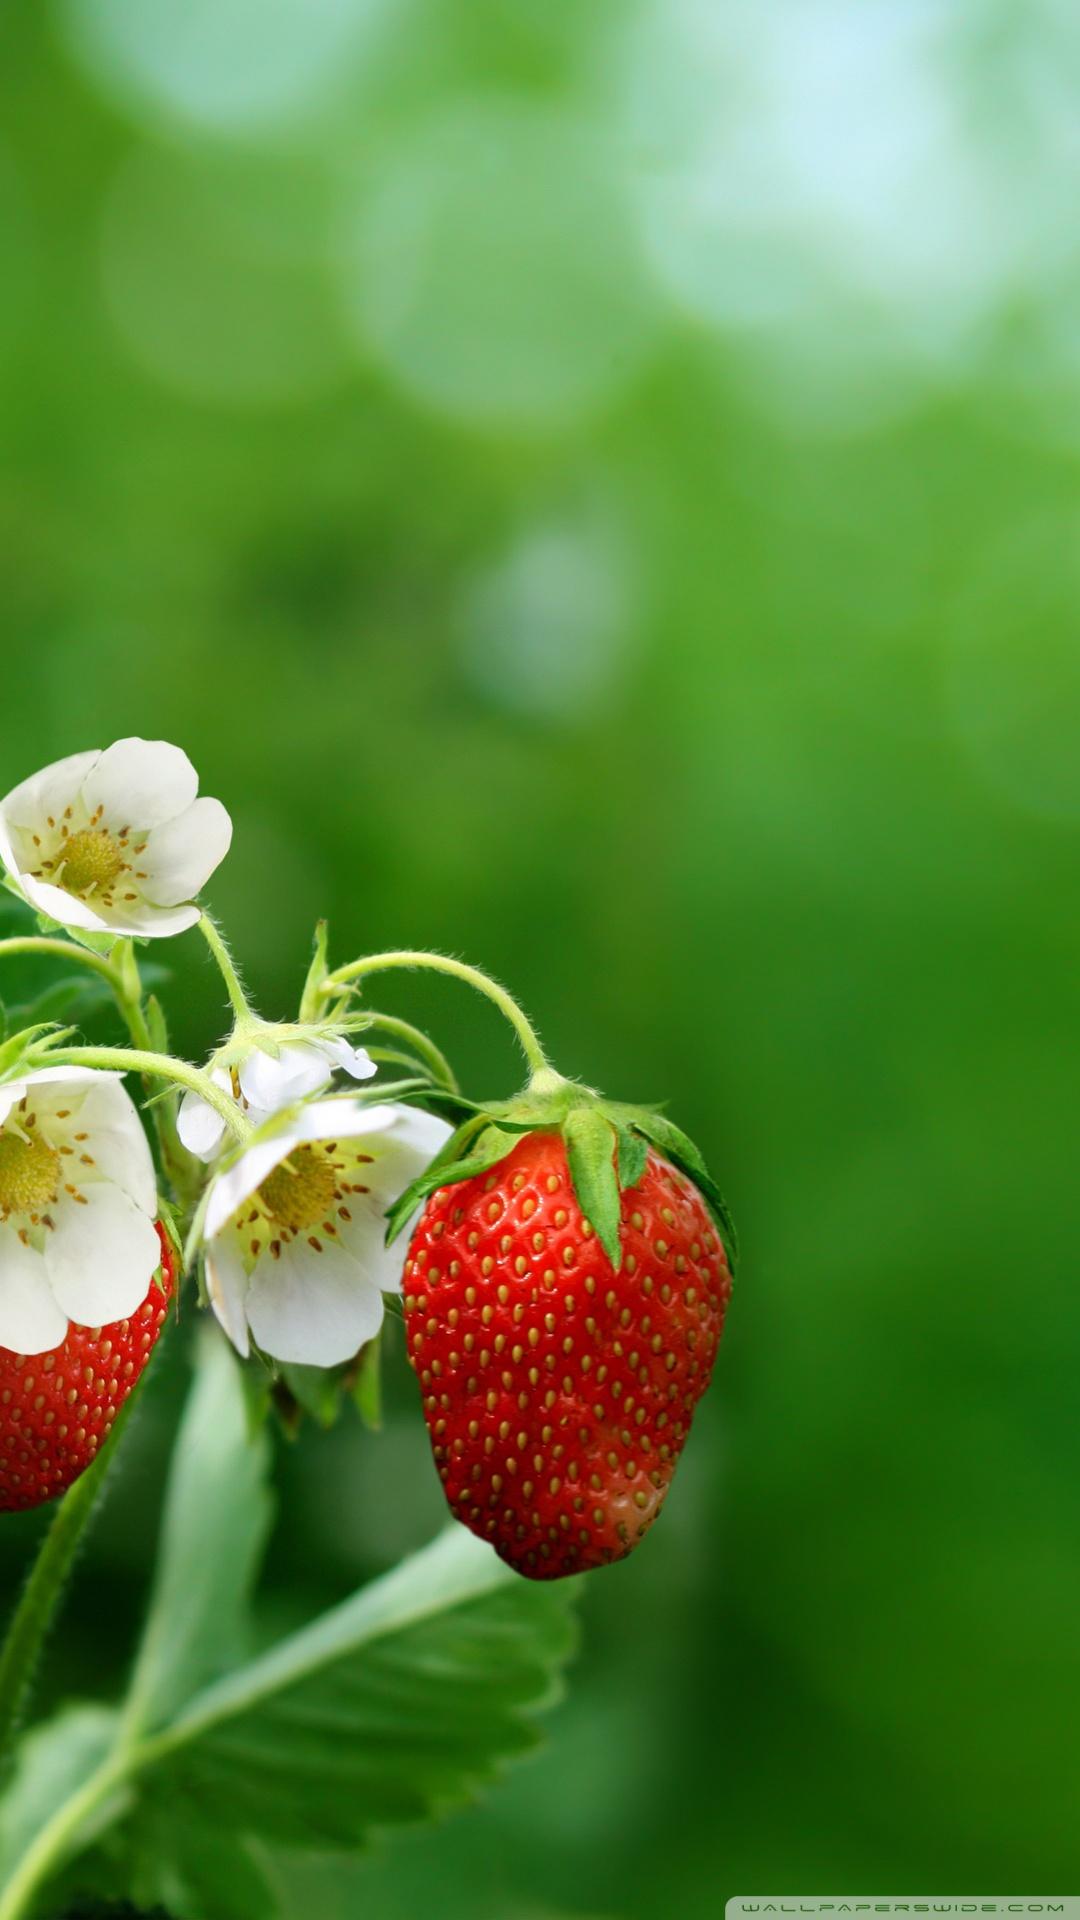 Strawberry Plant with Flowers and Fruits ❤ 4K HD Desktop Wallpaper